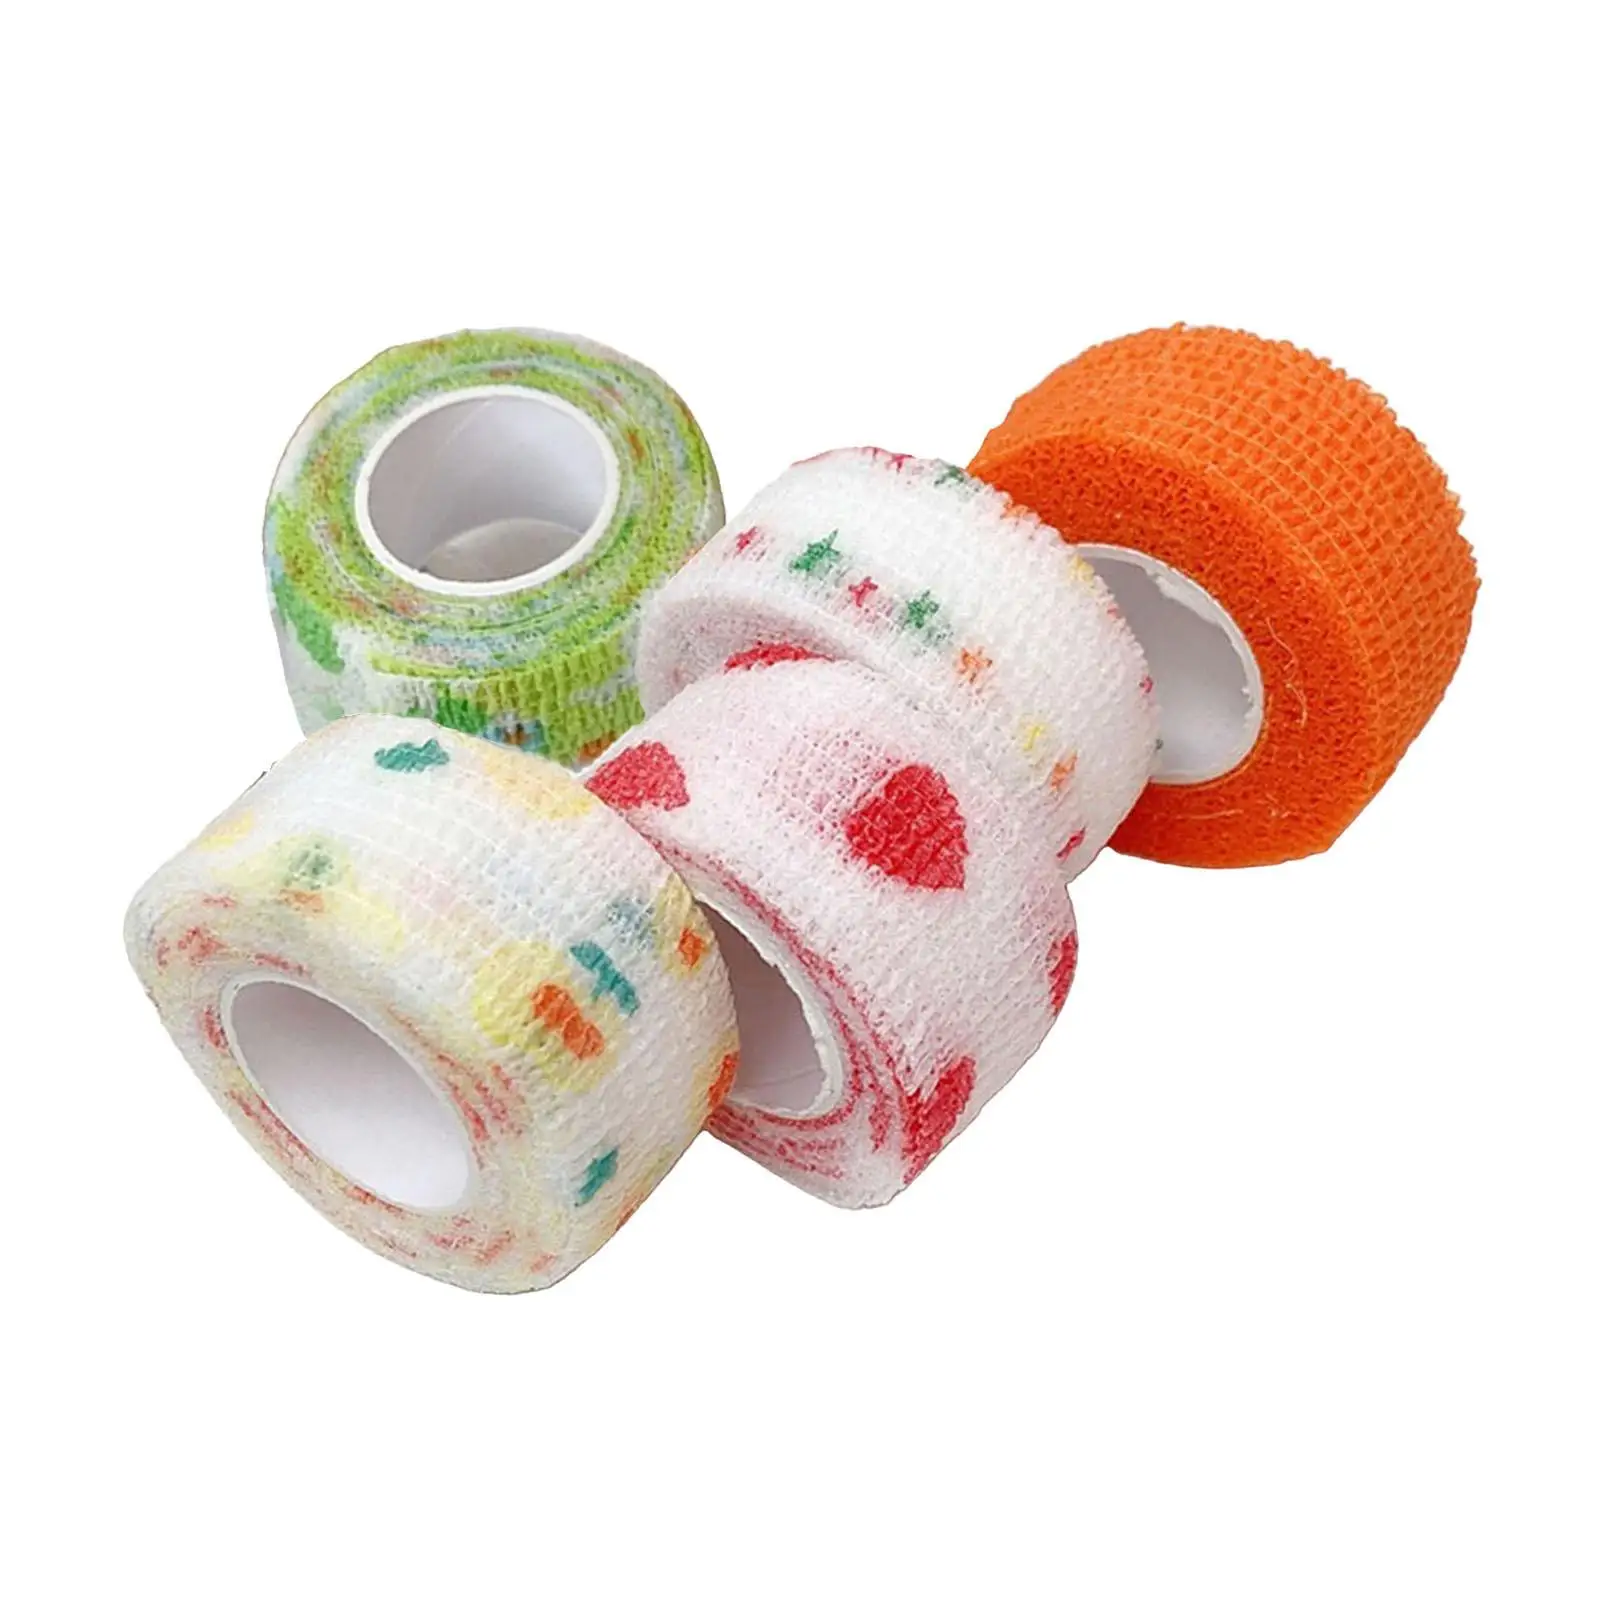 5Pcs Self Adherent Cohesive Bandages Non Woven Elastic Cover Width 2.5cm Random Color Waterproof for Nail 